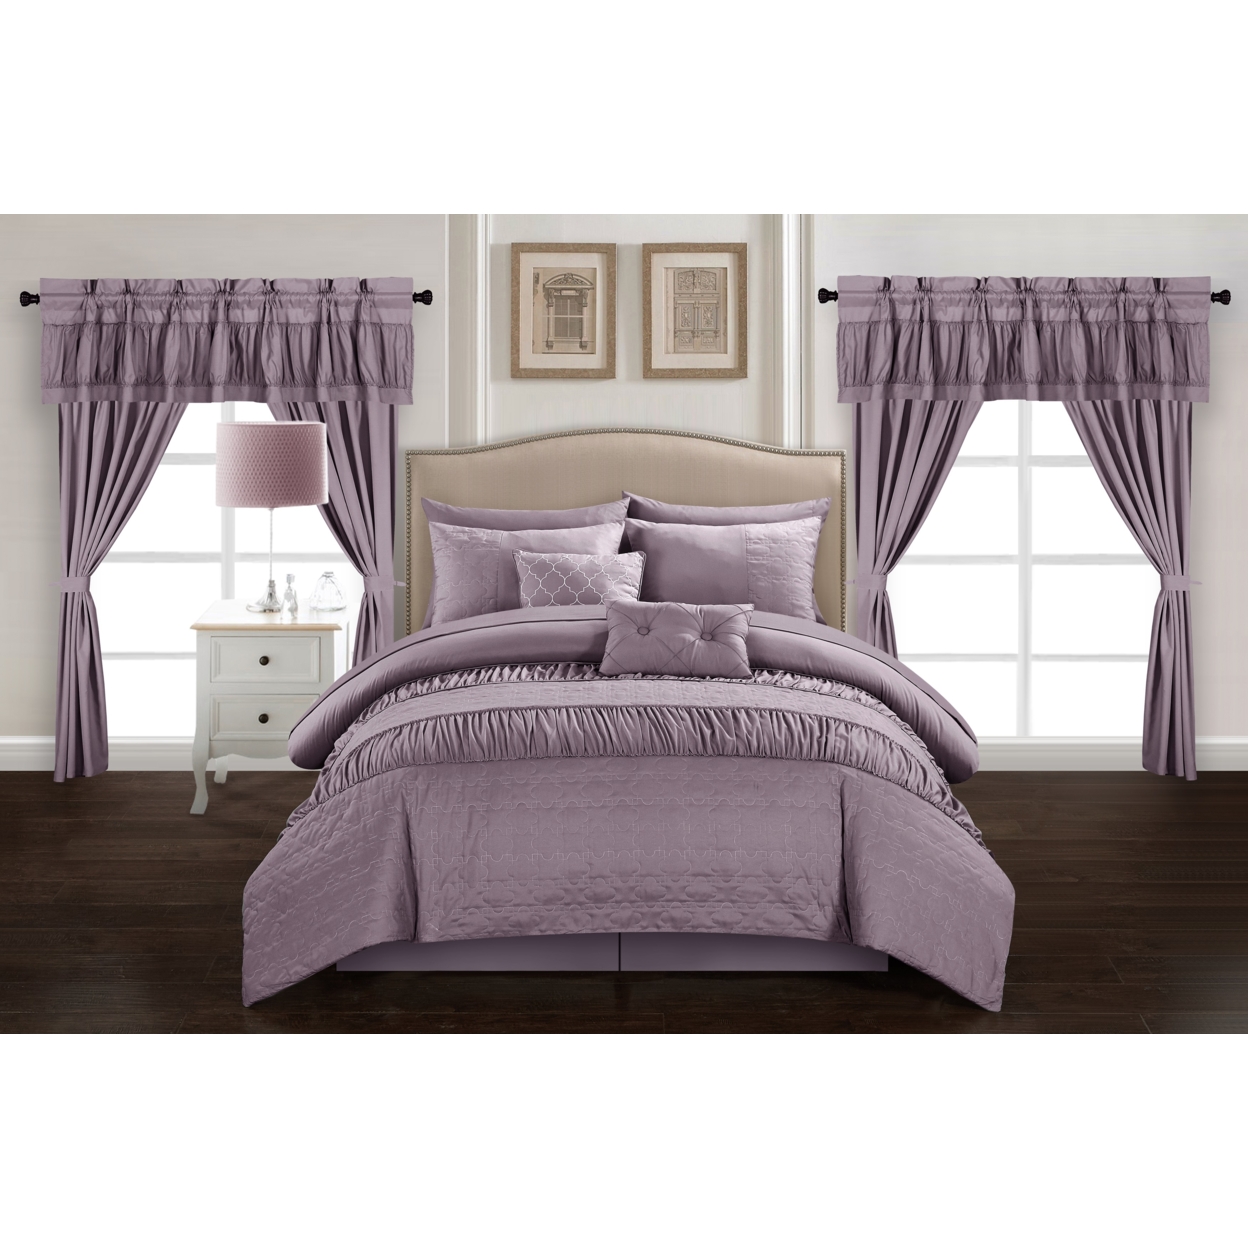 Mykonos 20 Piece Comforter Set Embossed Bedding - Sheets Window Treatments Decorative Pillows Shams Bed Skirt Included - Plum, King